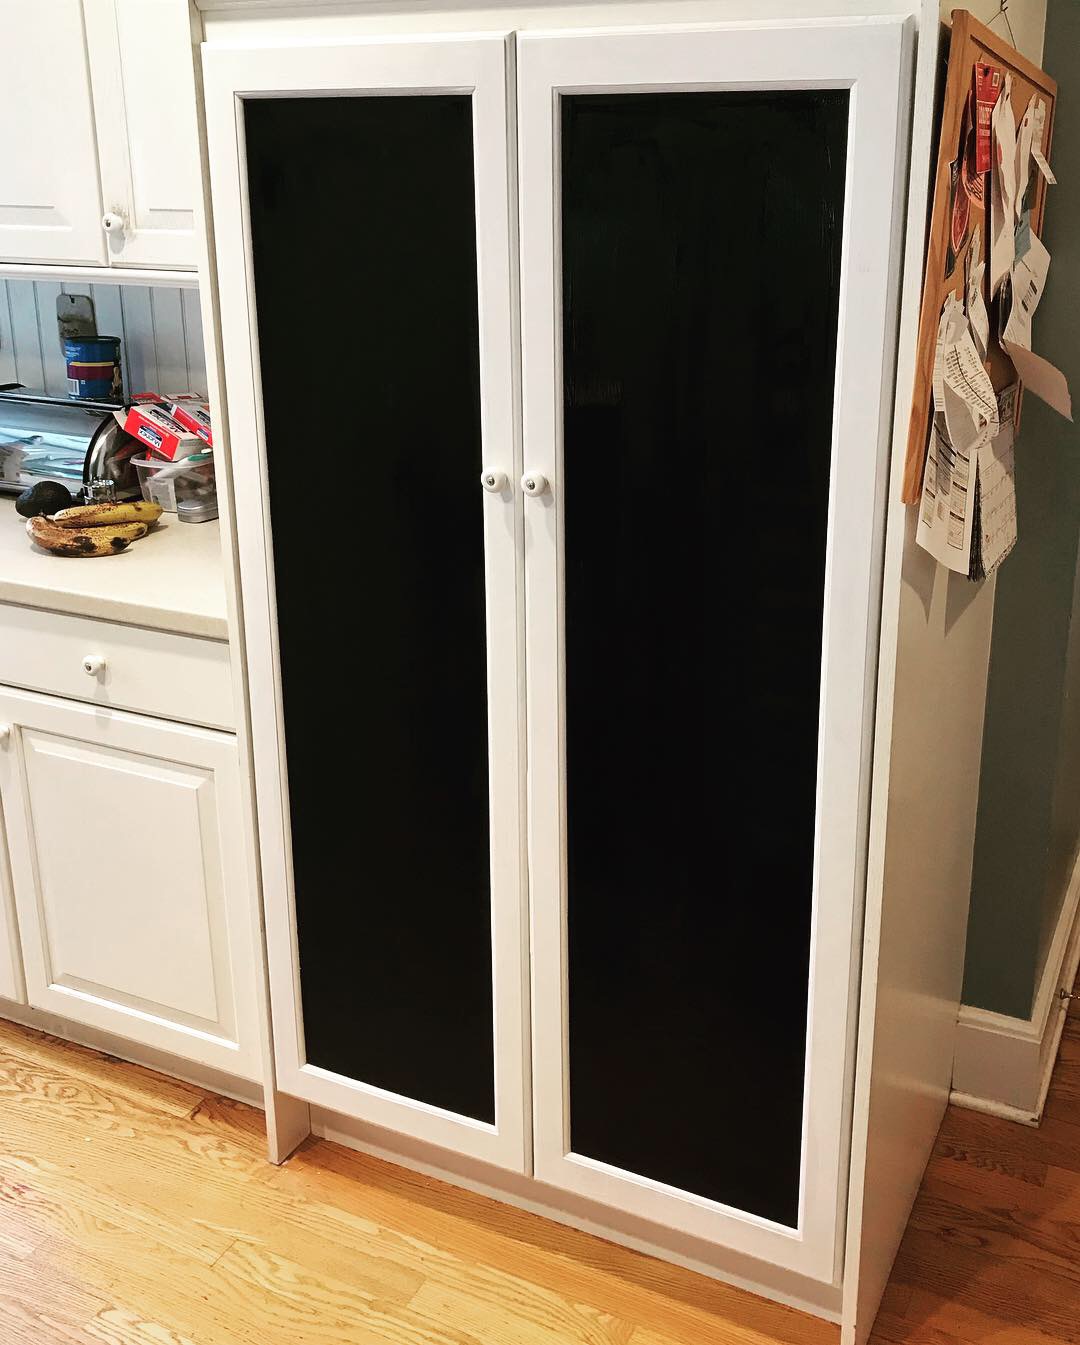  The doors are made of solid red oak to match the other cabinets in the kitchen The center panels are painted with chalkboard paint on both sides and provide plenty of space for notes, grocery lists, etc.  